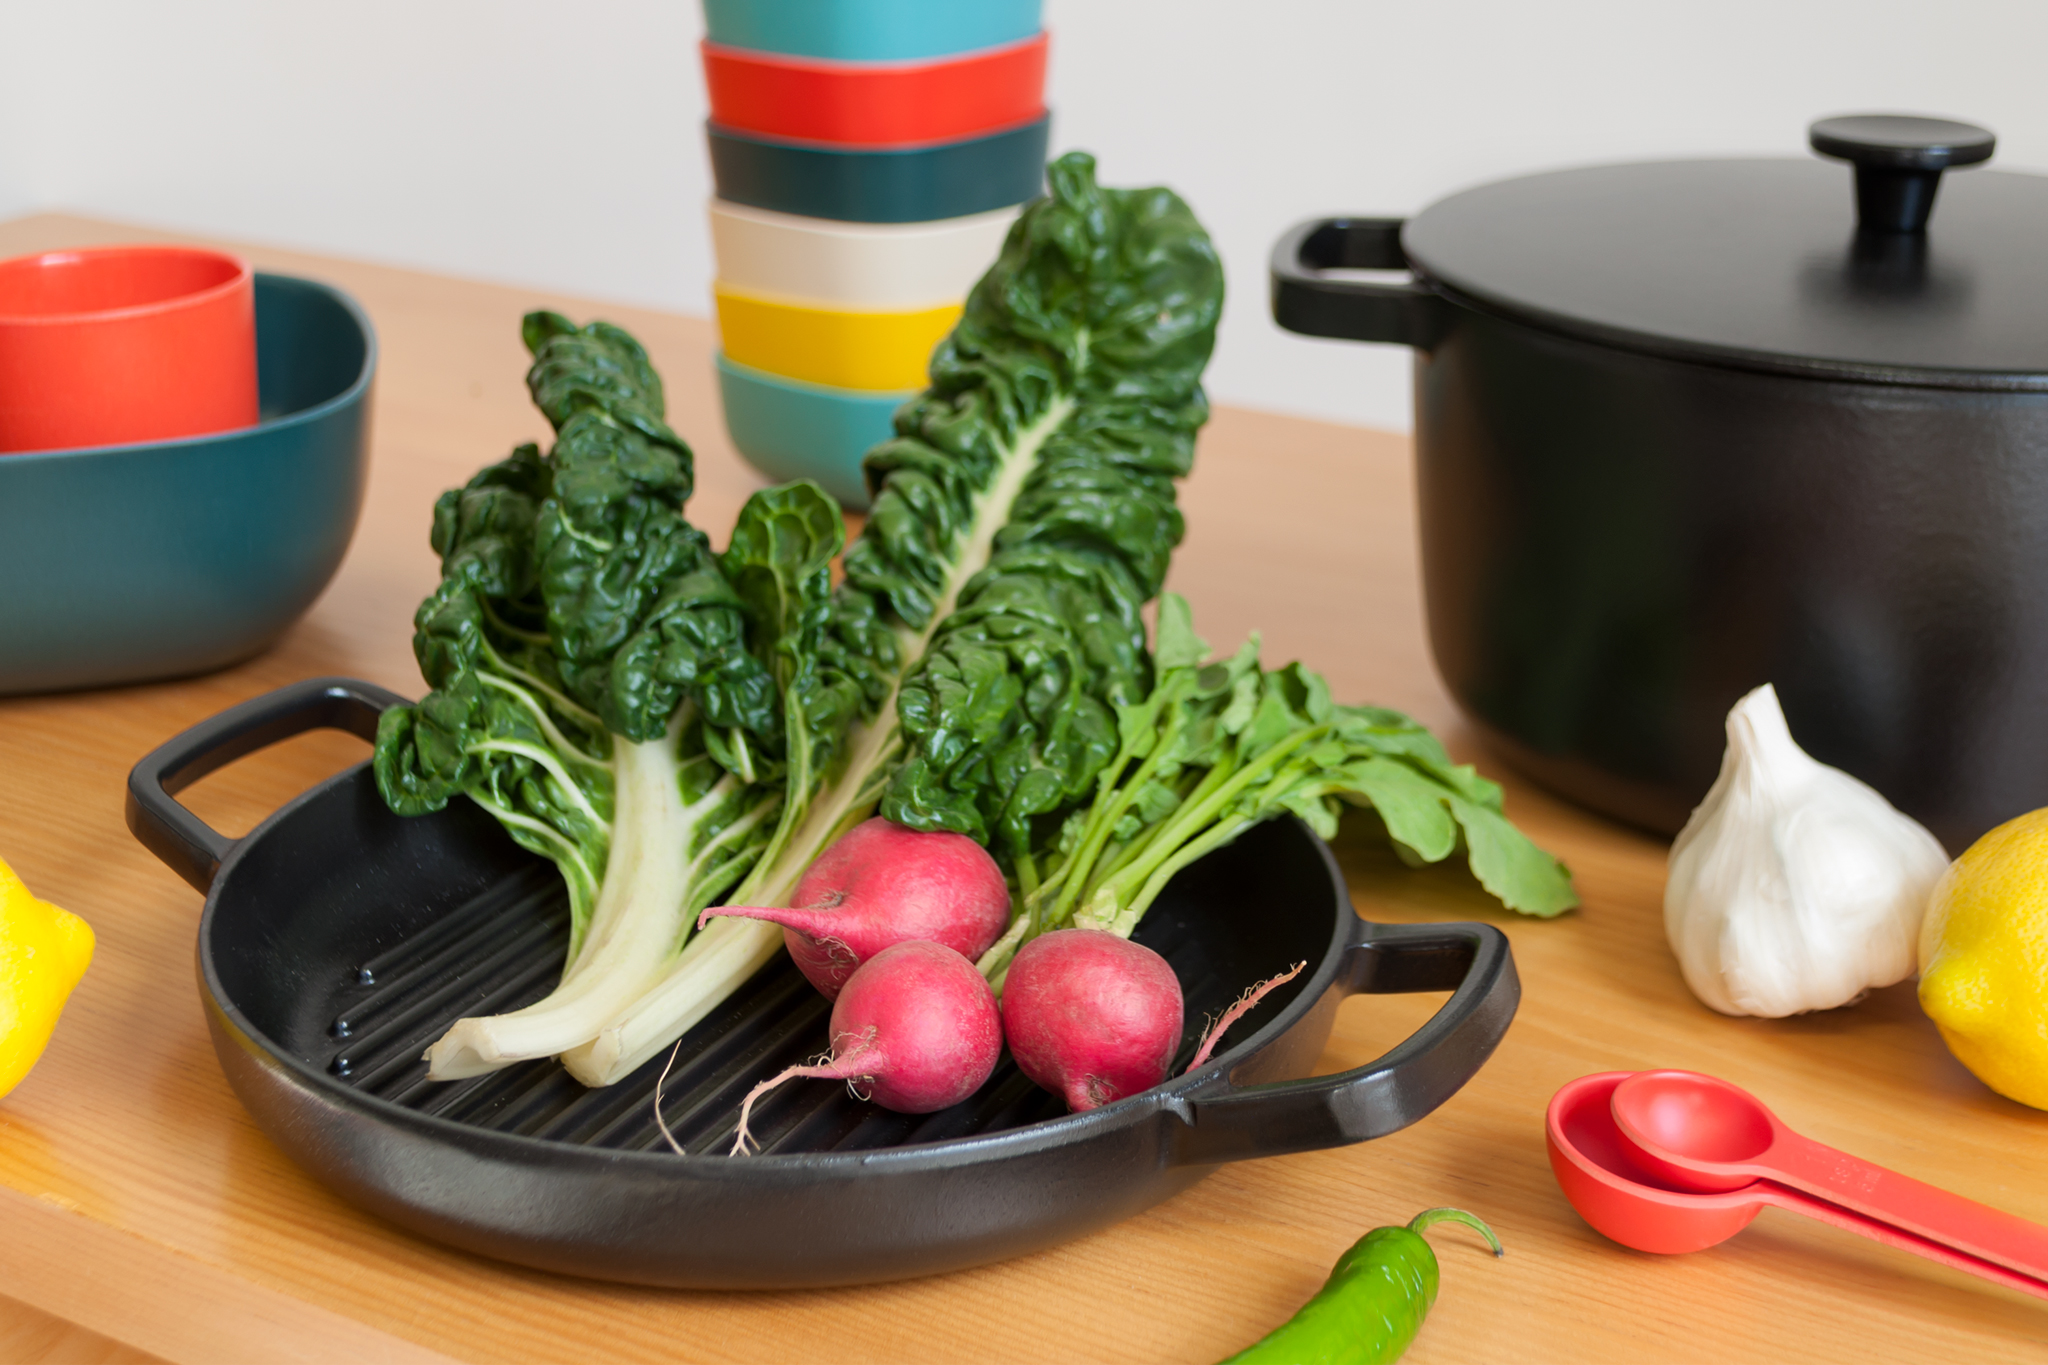 On a wooden surface, a black skillet holds fresh radishes and kale in the foreground, and is surrounded by colorful dishware, a black pot, and other ingredients